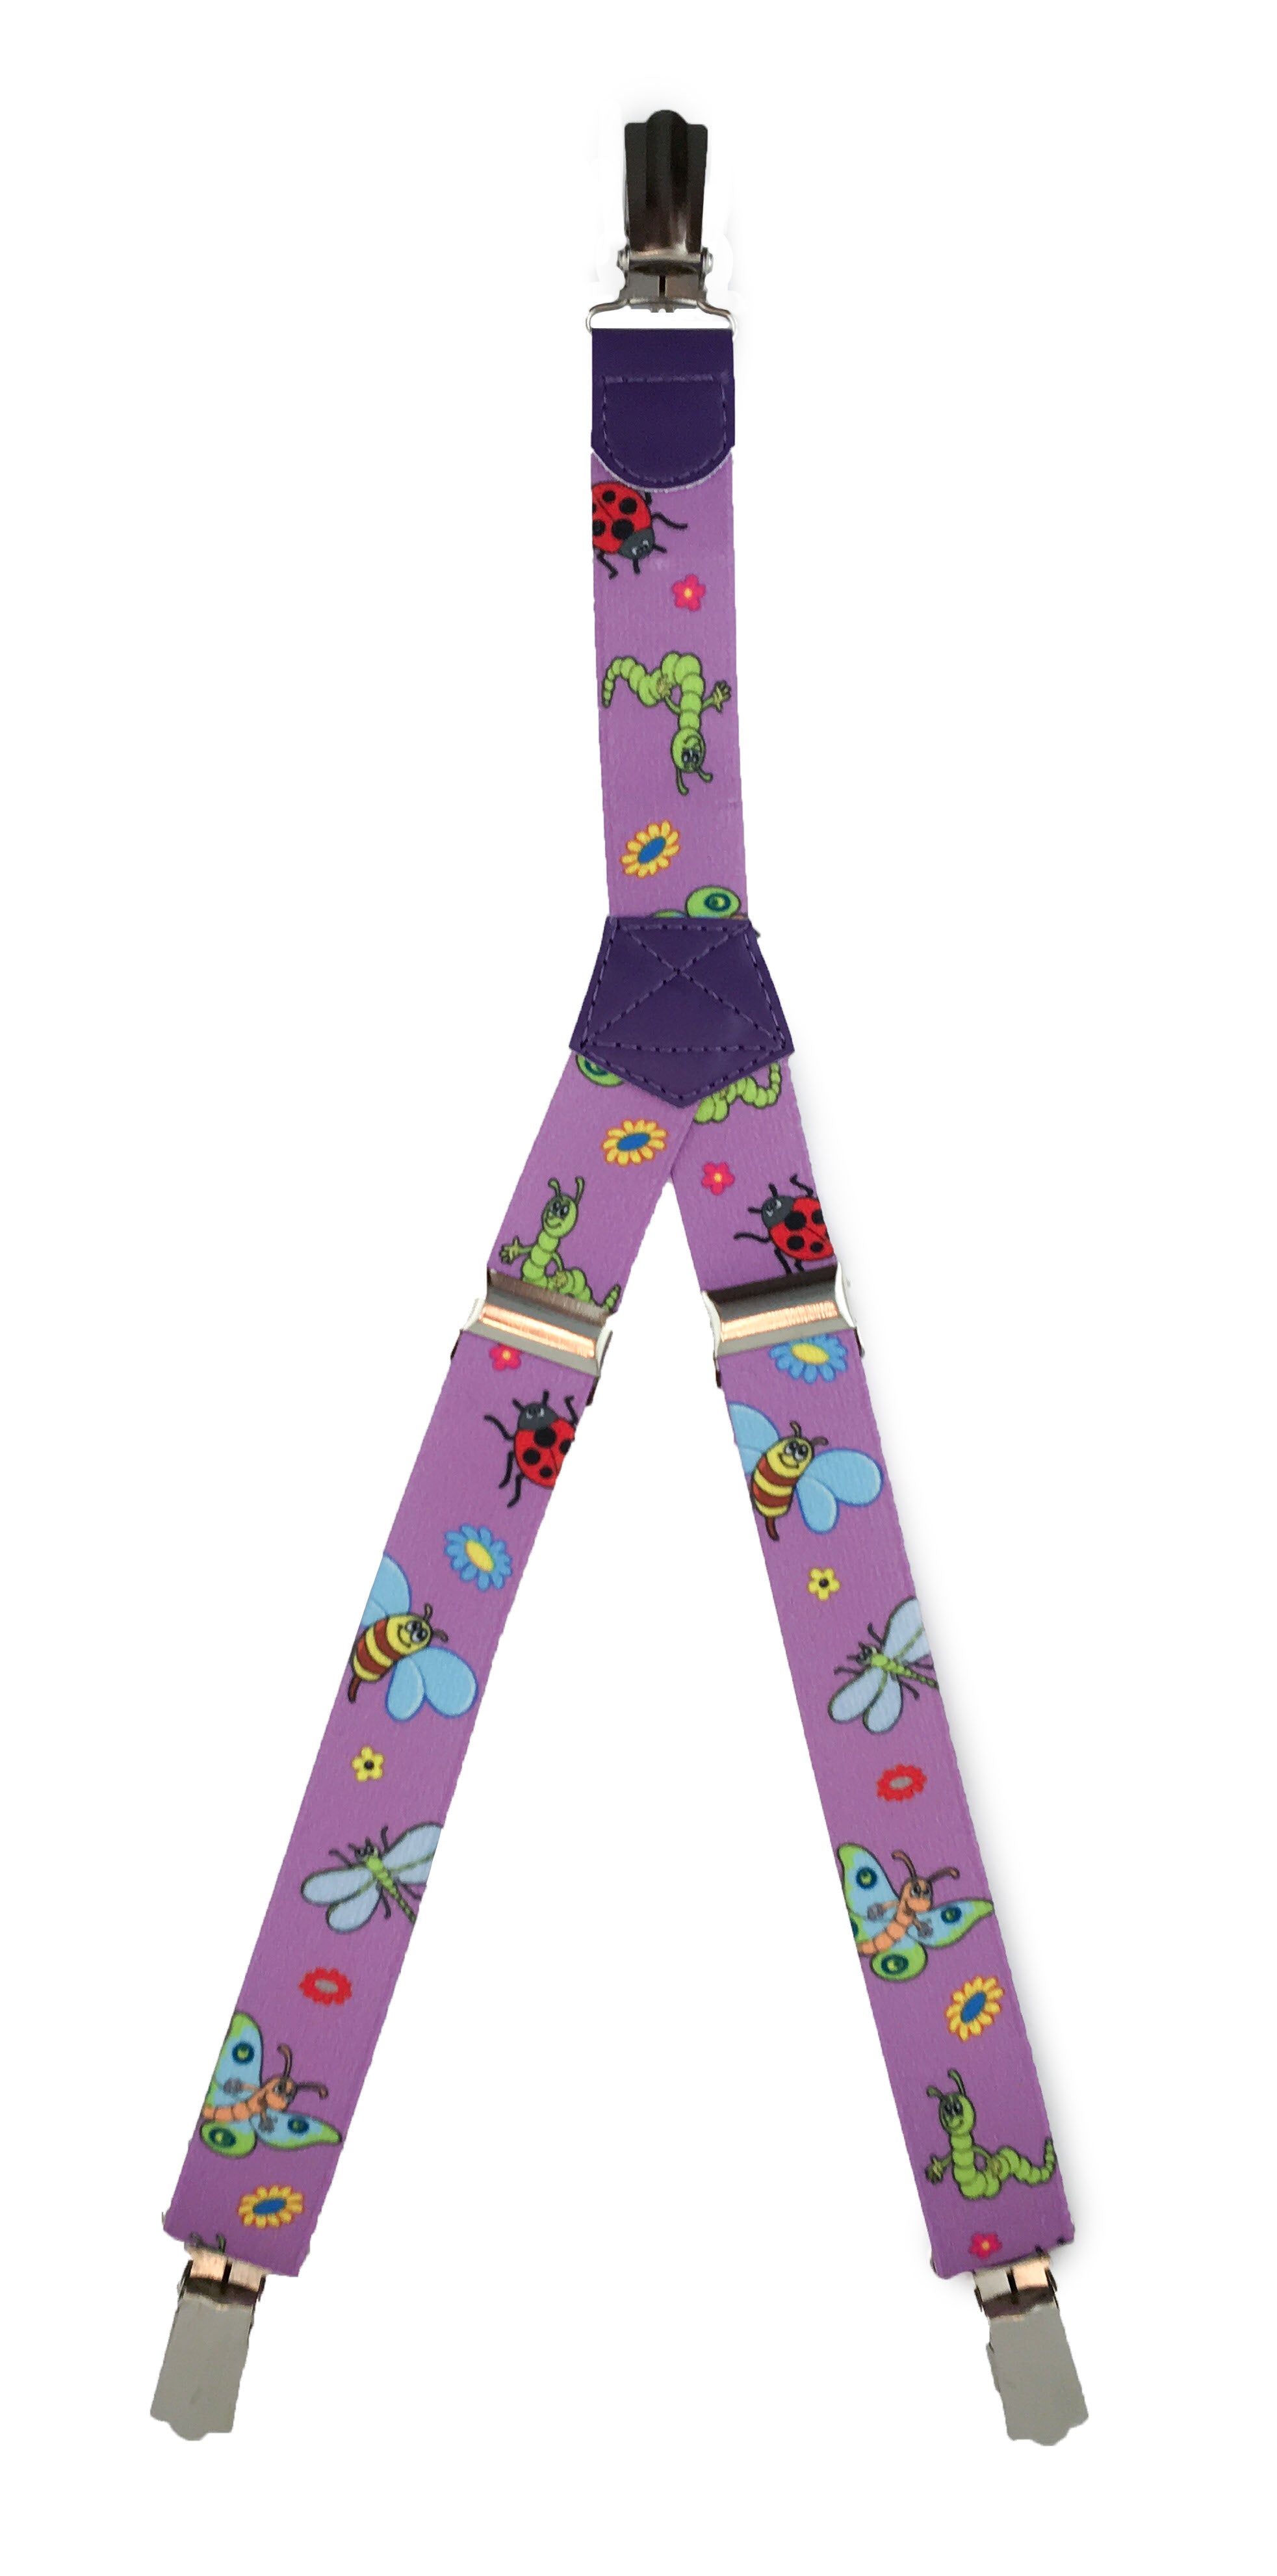 Patterned Kid's Clip Suspenders - Purple Insects